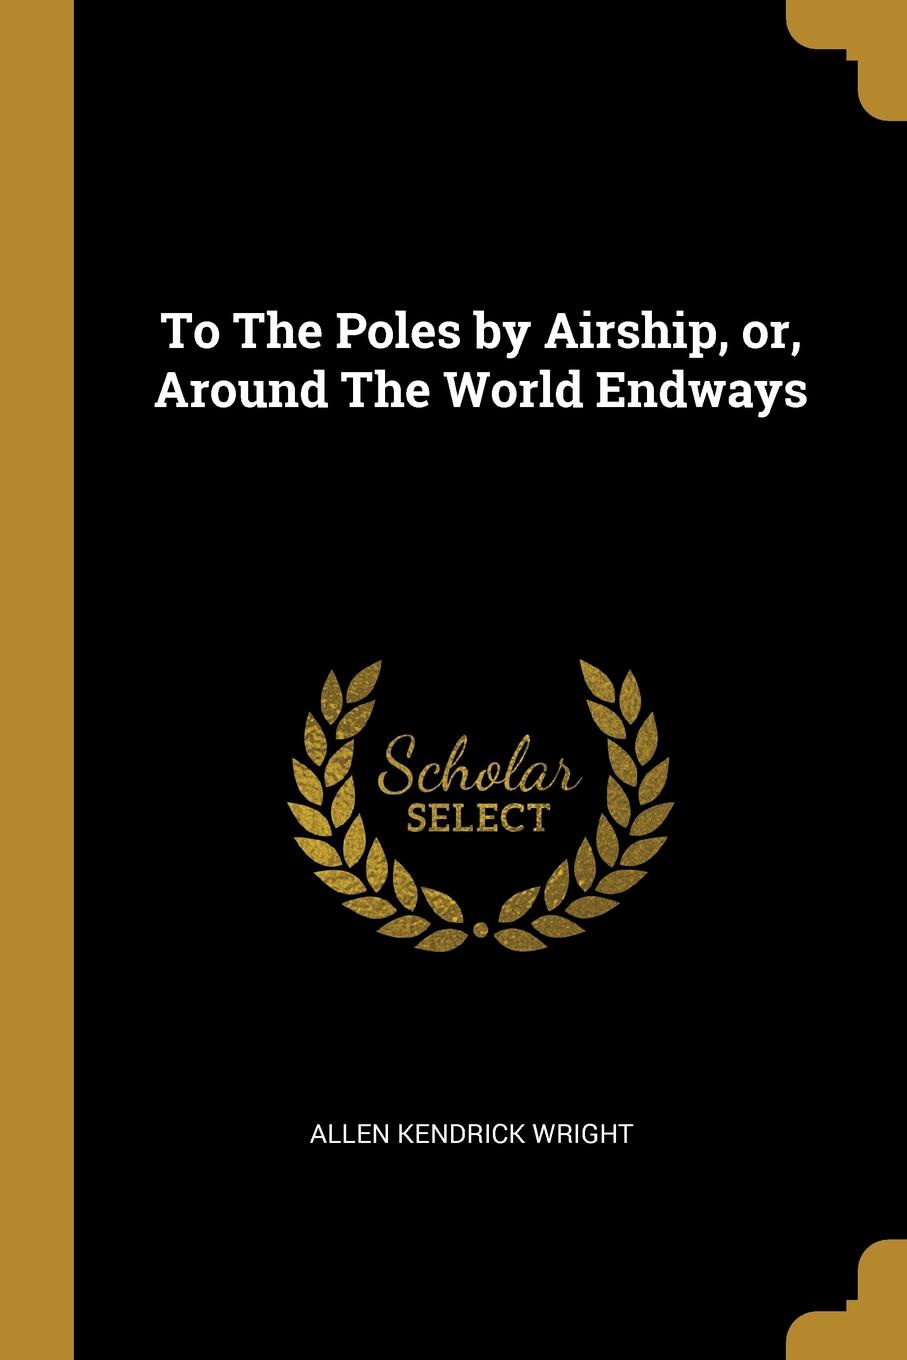 To The Poles by Airship, or, Around The World Endways